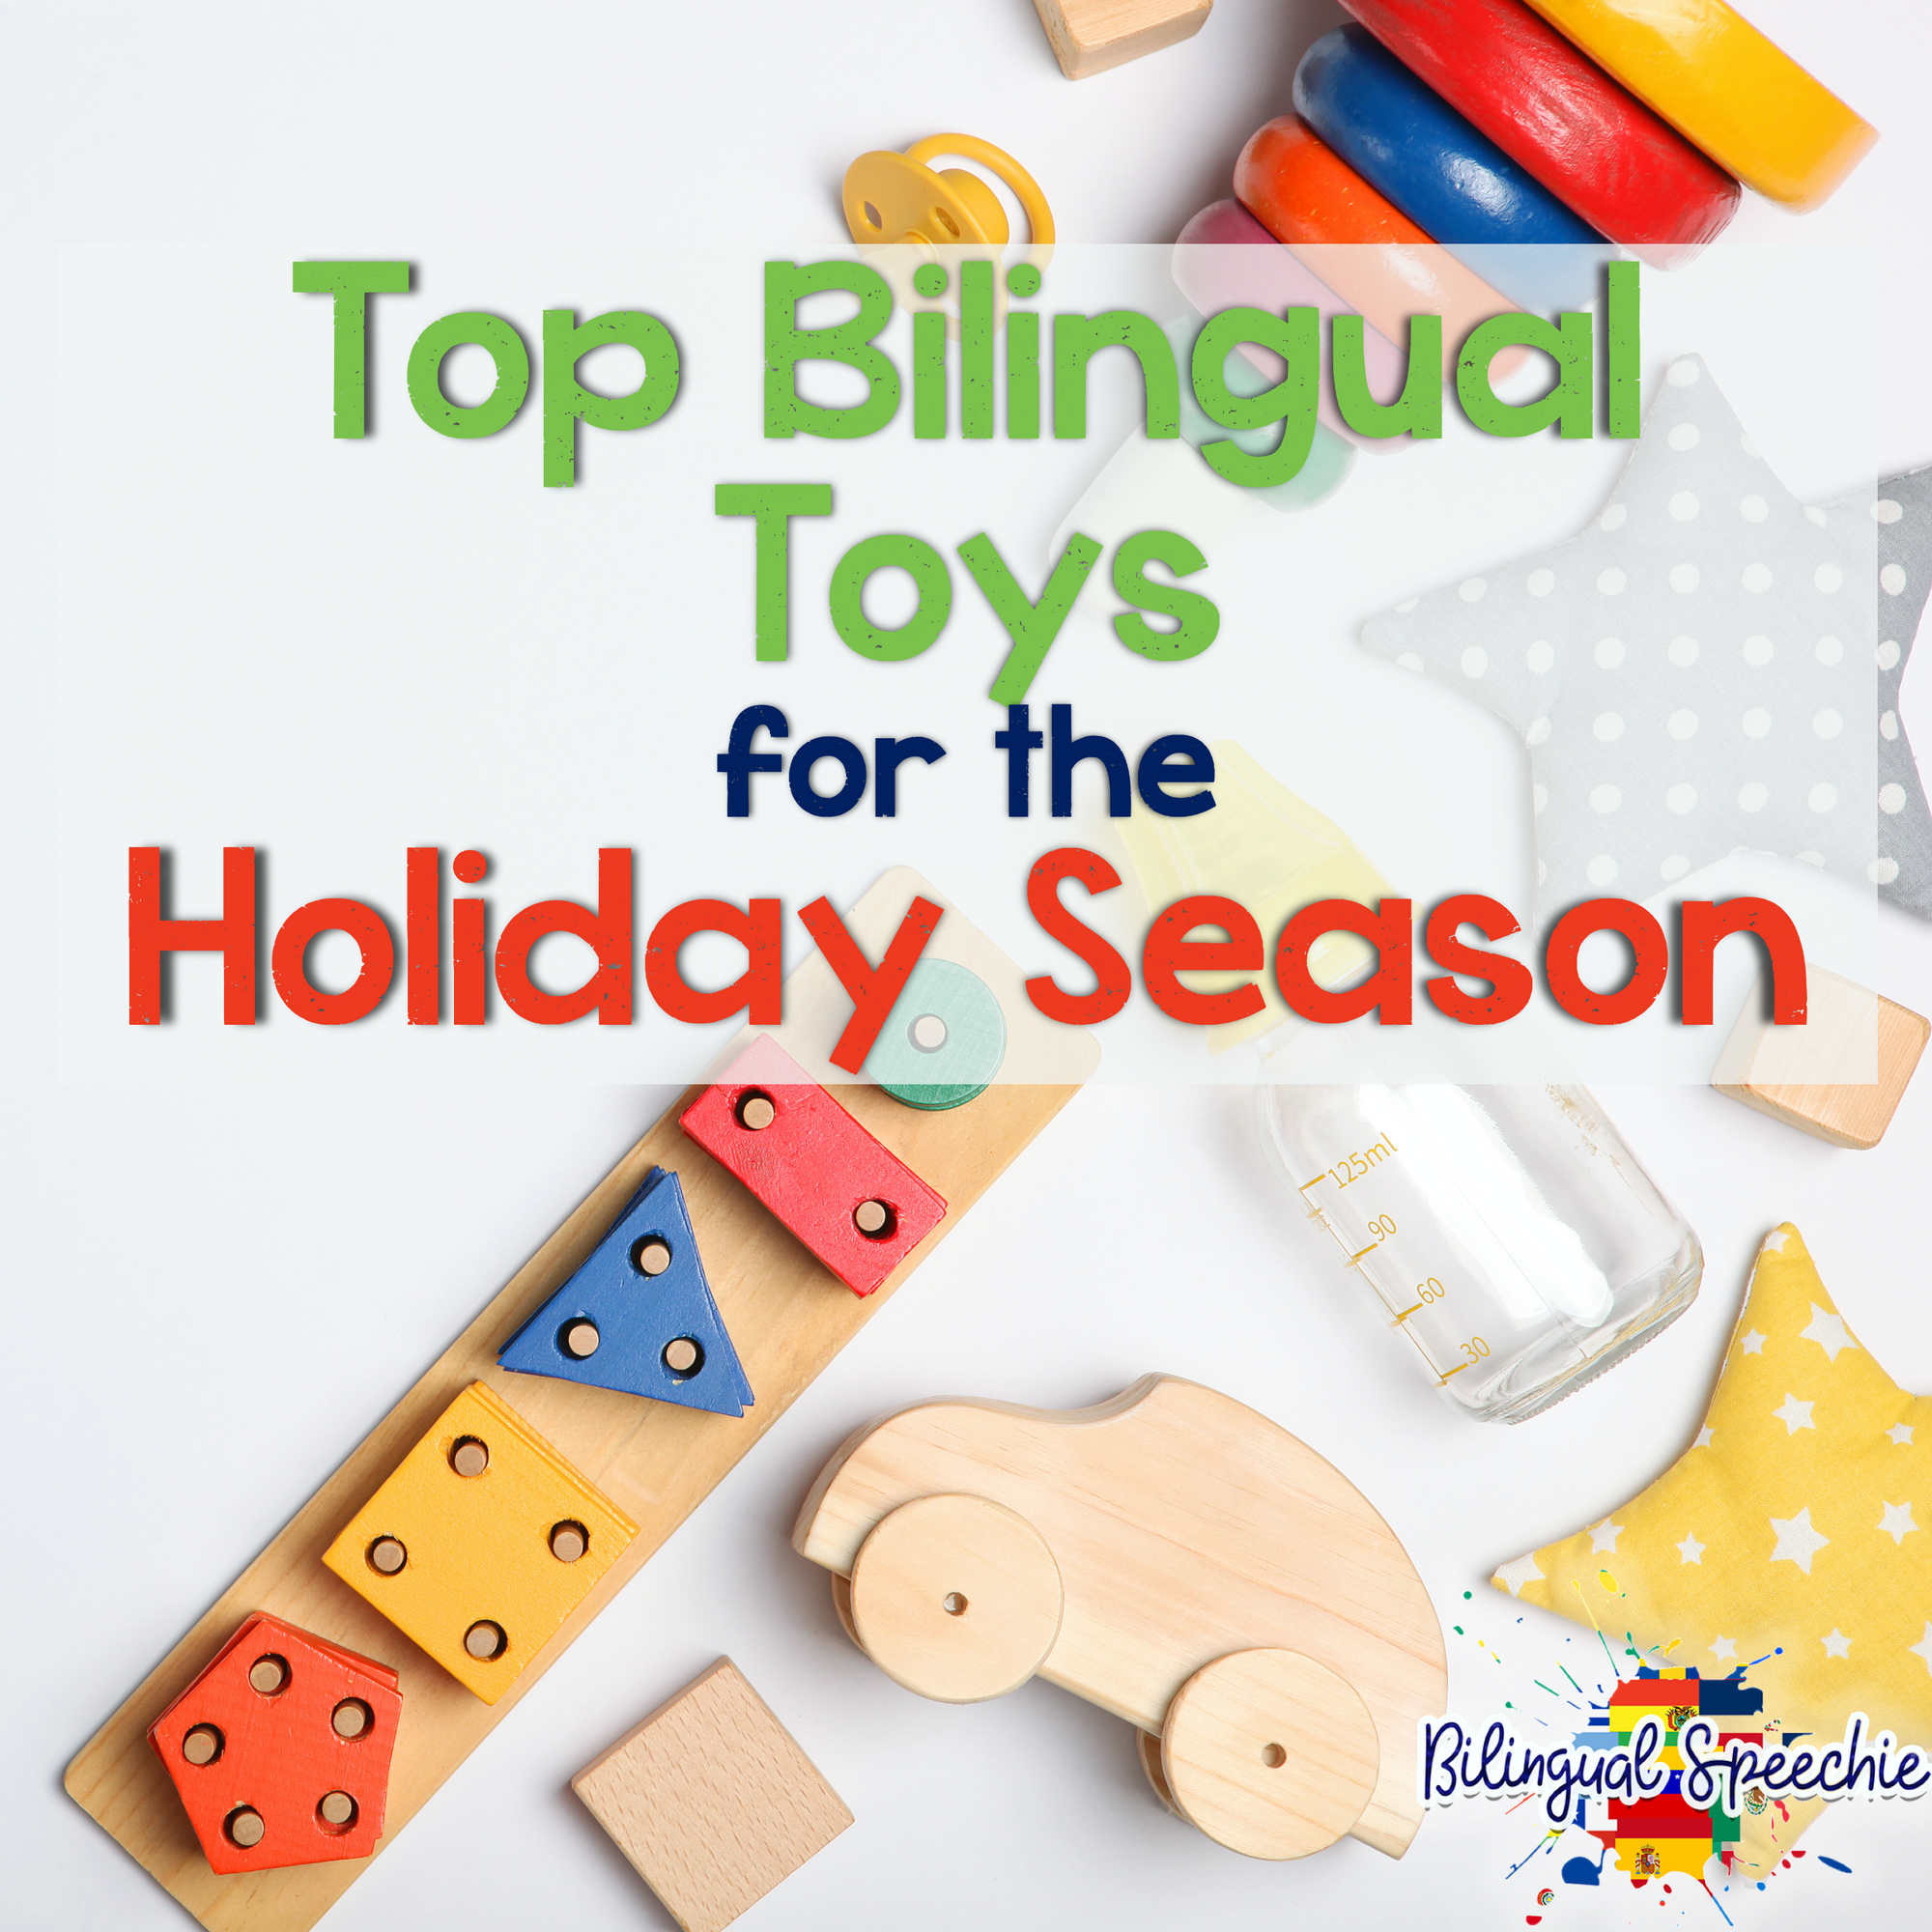 Best Sellers: The most popular items in Bilingual &  Multicultural Education